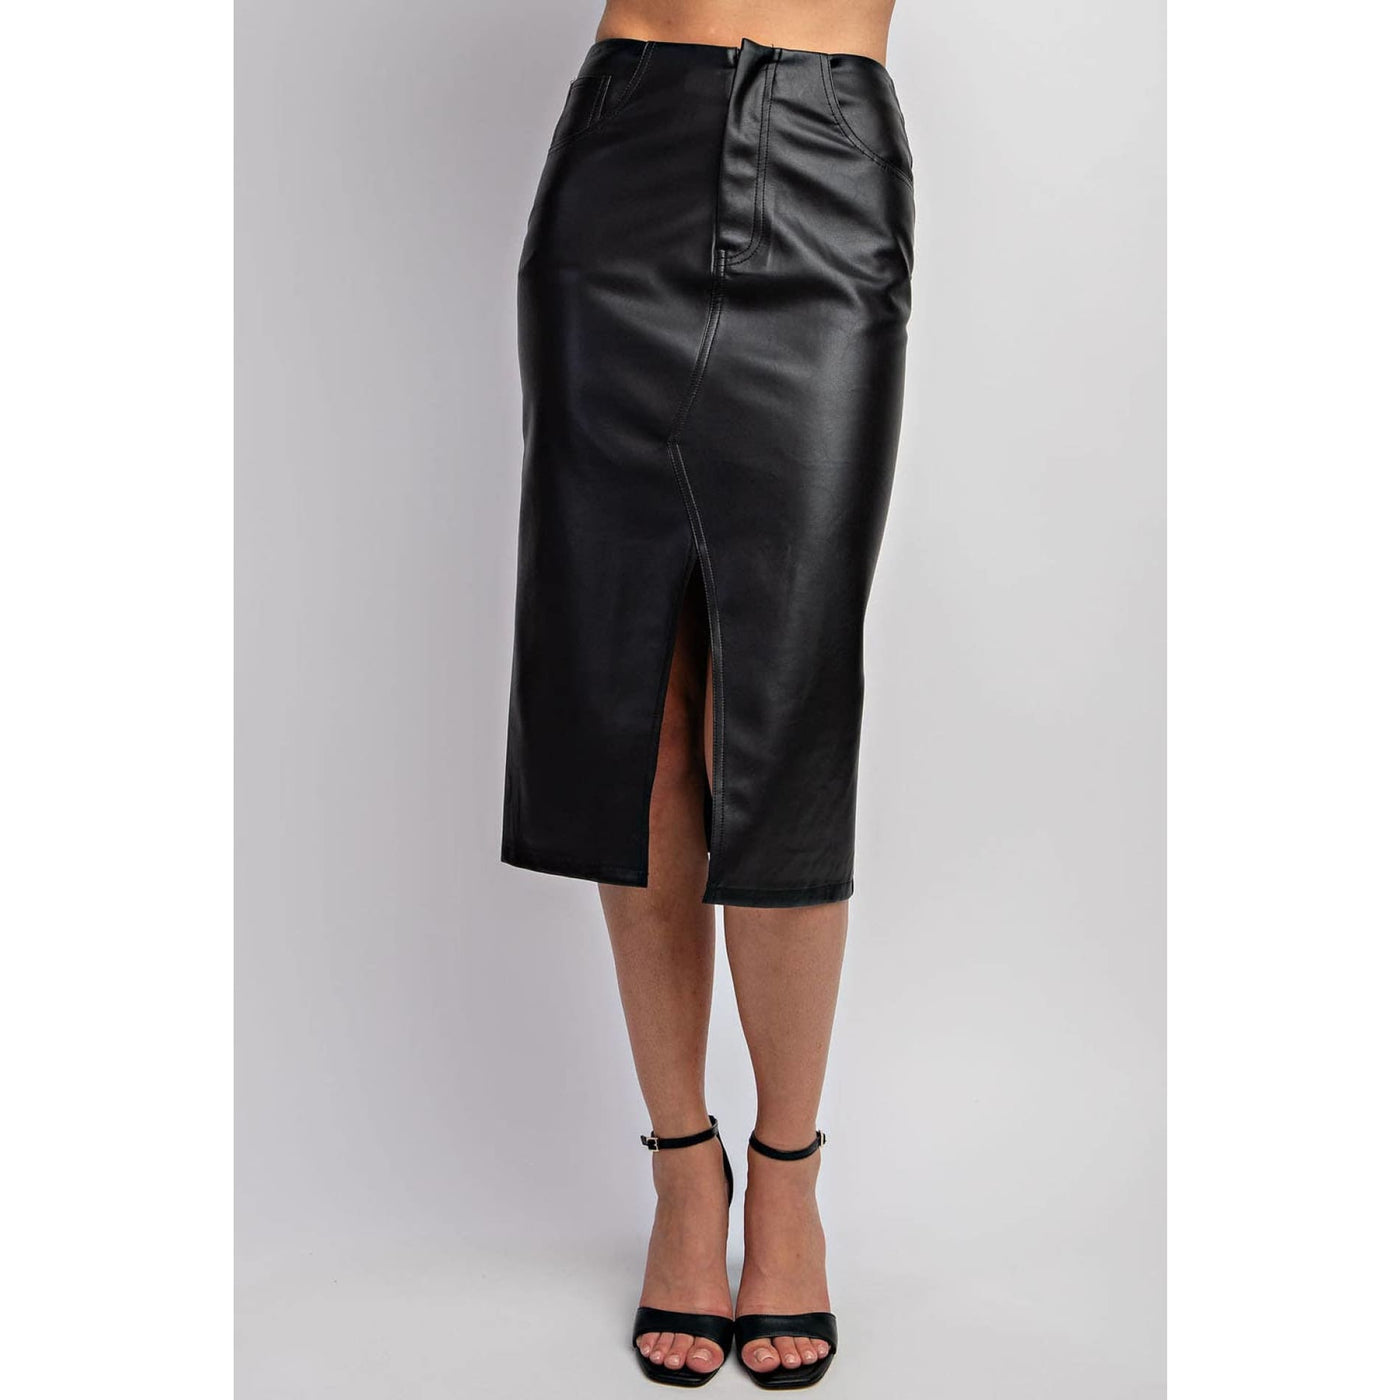 Find The Time Faux Leather Midi Skirt - 150 Bottoms